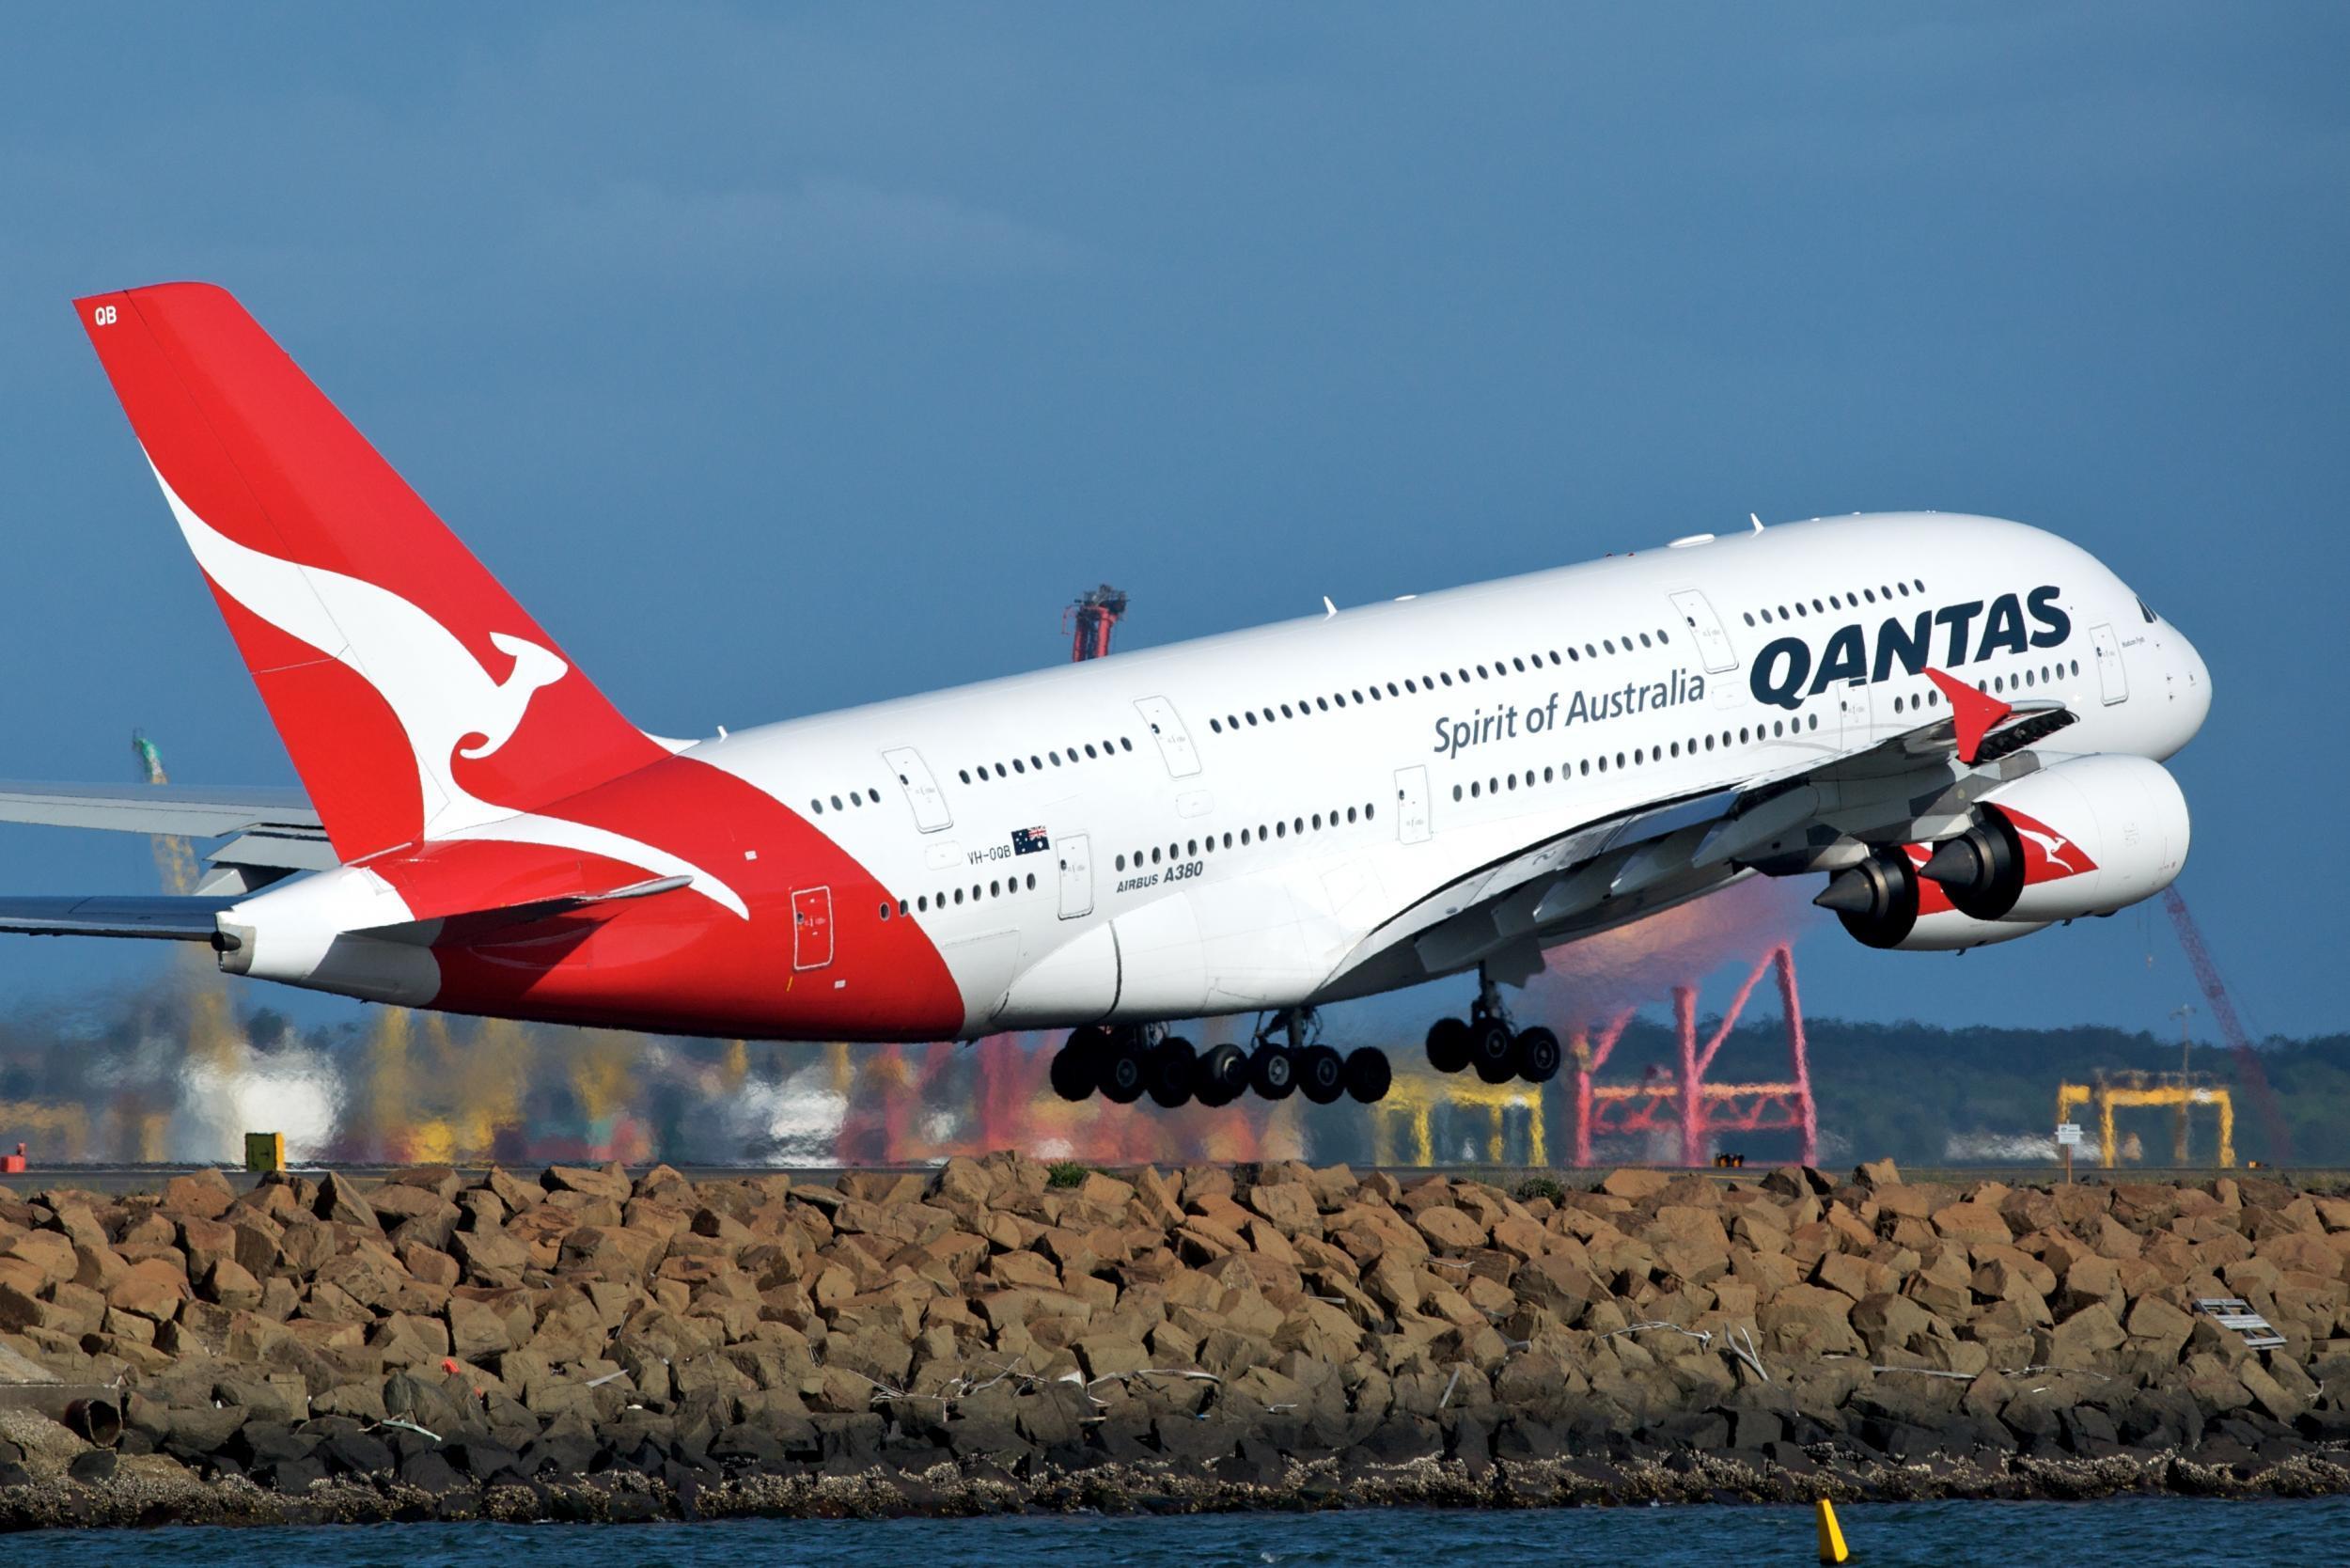 Qantas flight sold to anywhere within 10 minutes